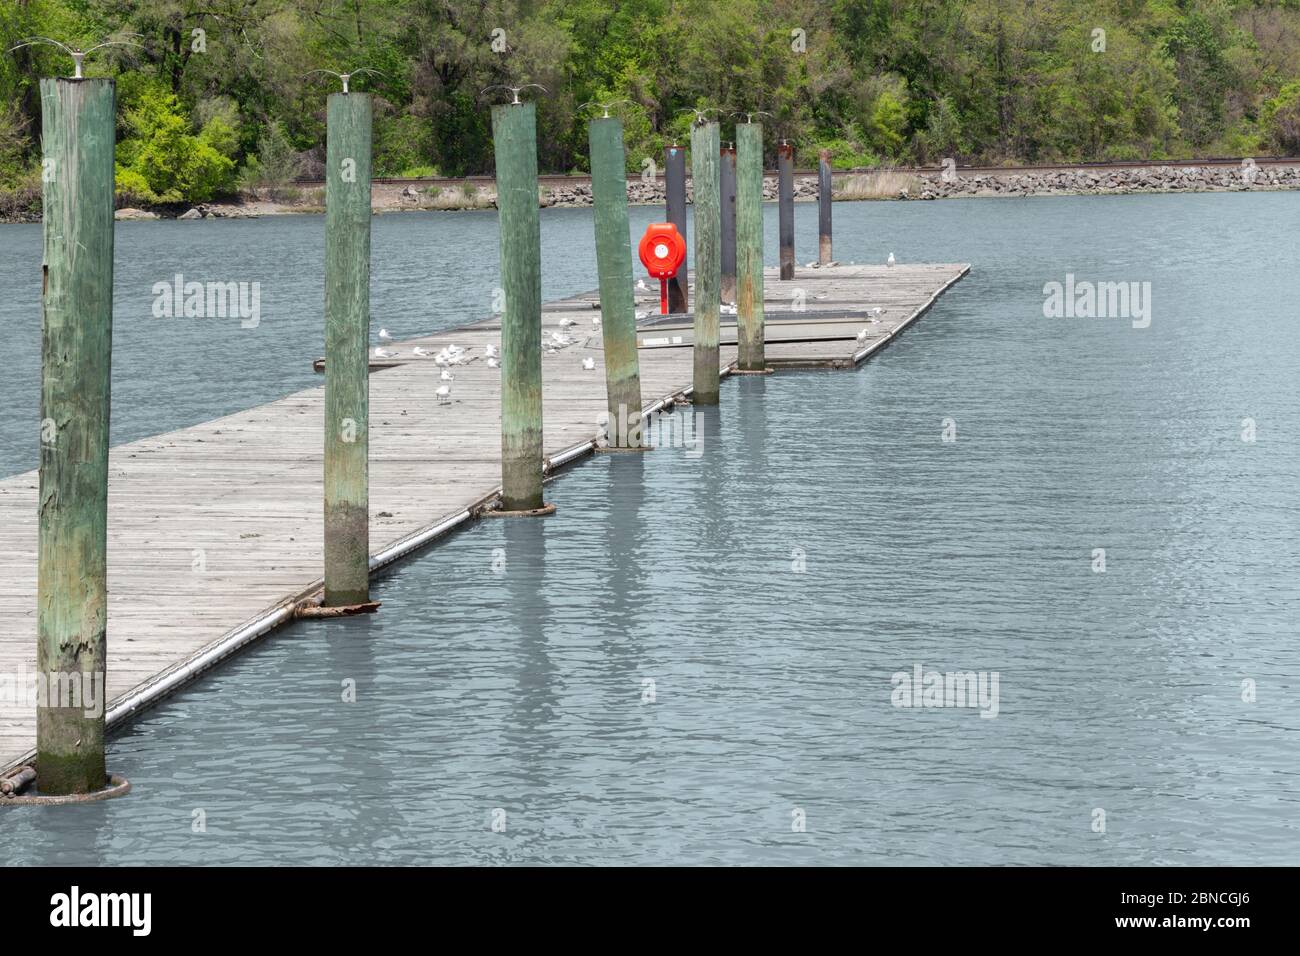 weathered, wooden dock extending into rippling lake water with green wooden pillars along the side, a bright red life preserver container and seagulls Stock Photo